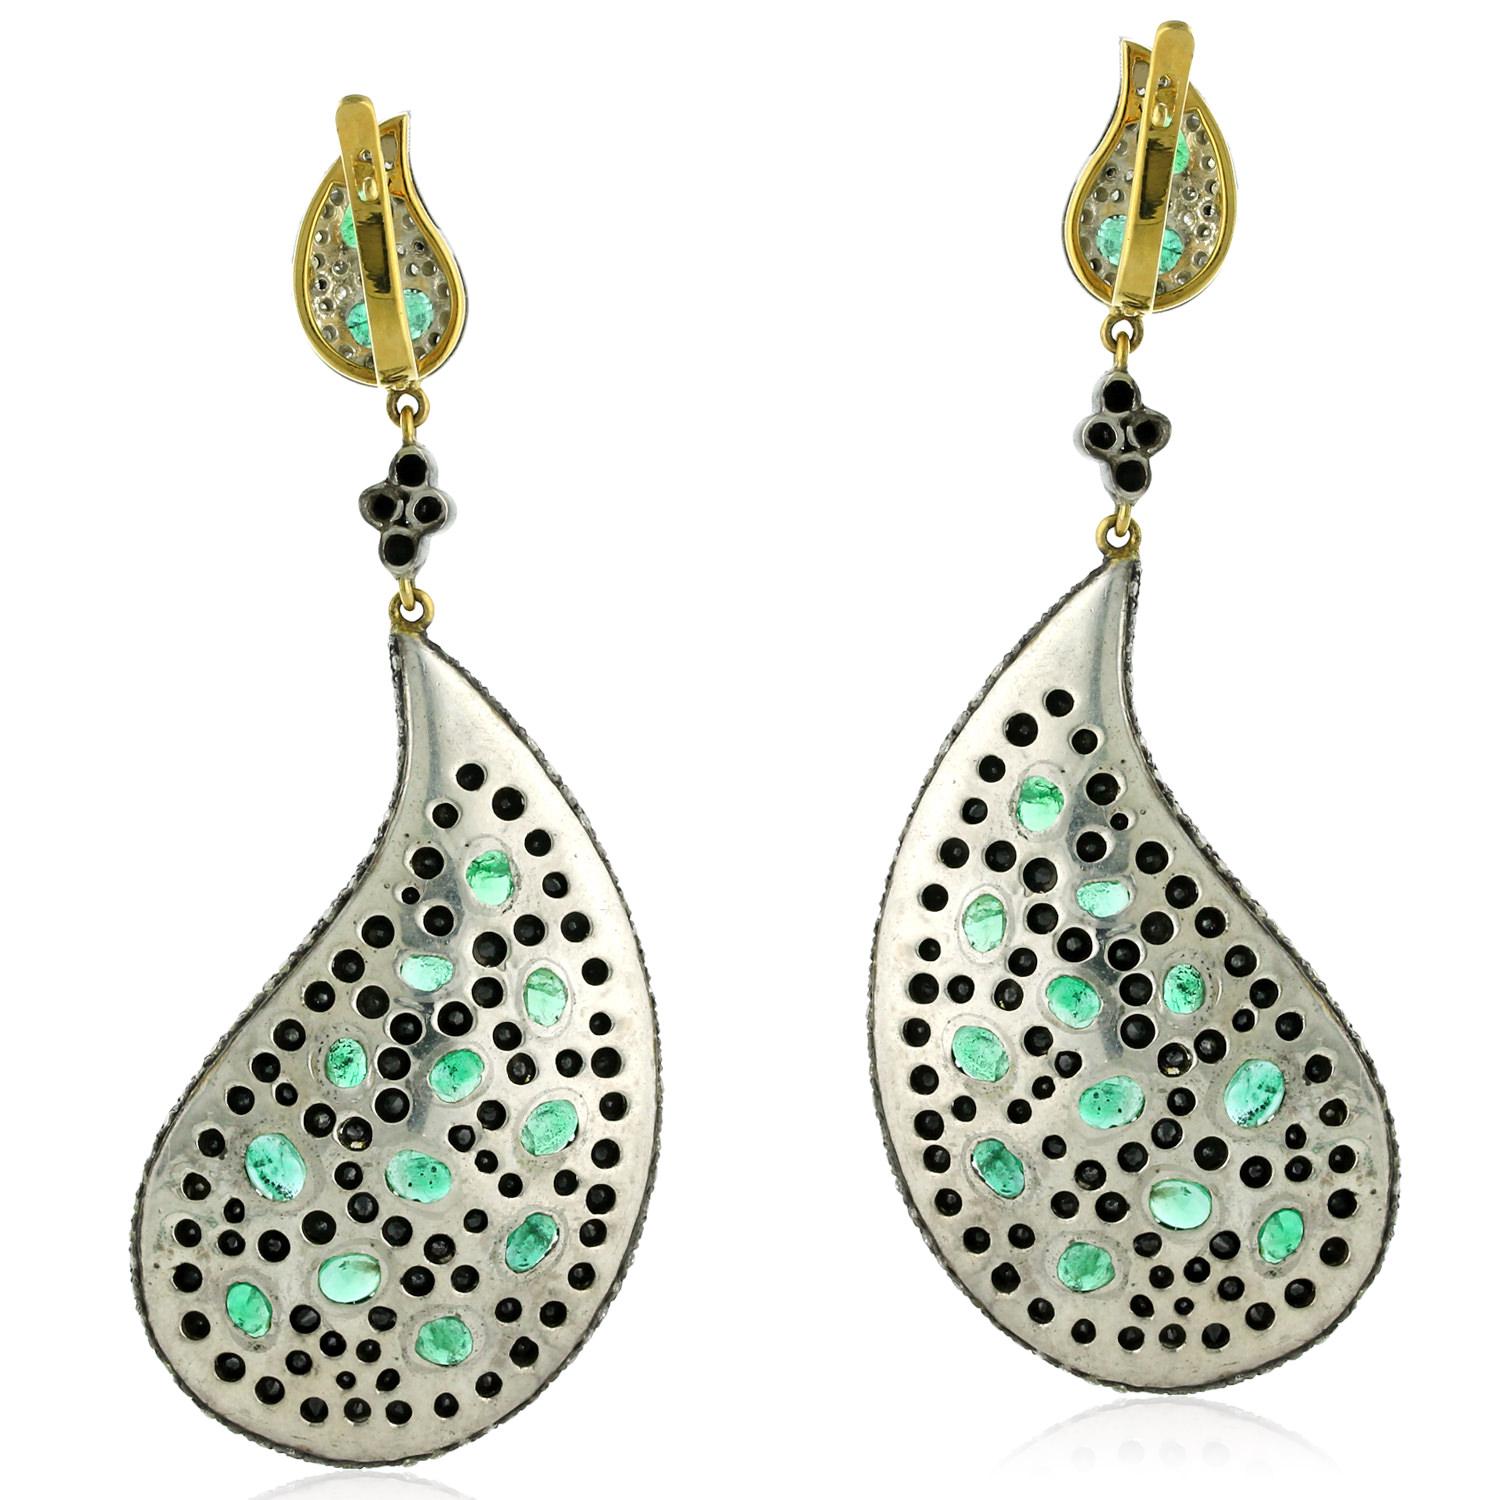 These stunning feather shaped earrings are made from 14k gold and silver, and feature emeralds and pave diamonds. The combination of the rich green emeralds and sparkling diamonds creates a luxurious and sophisticated look. The feather design adds a